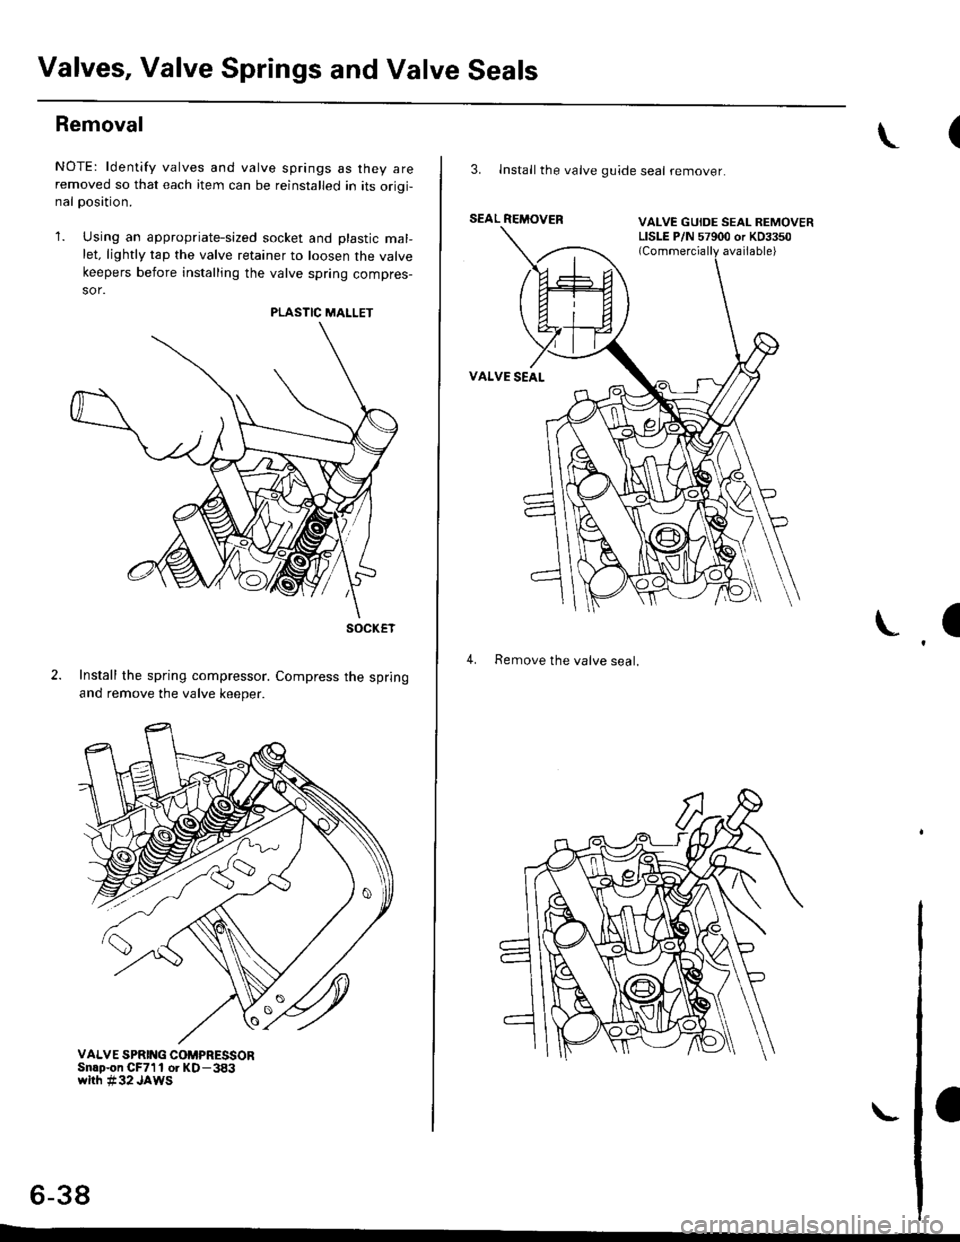 HONDA CIVIC 1999 6.G Workshop Manual Valves, Valve Springs and Valve Seals
Removal
NOTE: ldentify valves and valve springs as they areremoved so that each item can be reinstalled in its orioi-nal oosition.
1. Using an appropriate-sized 